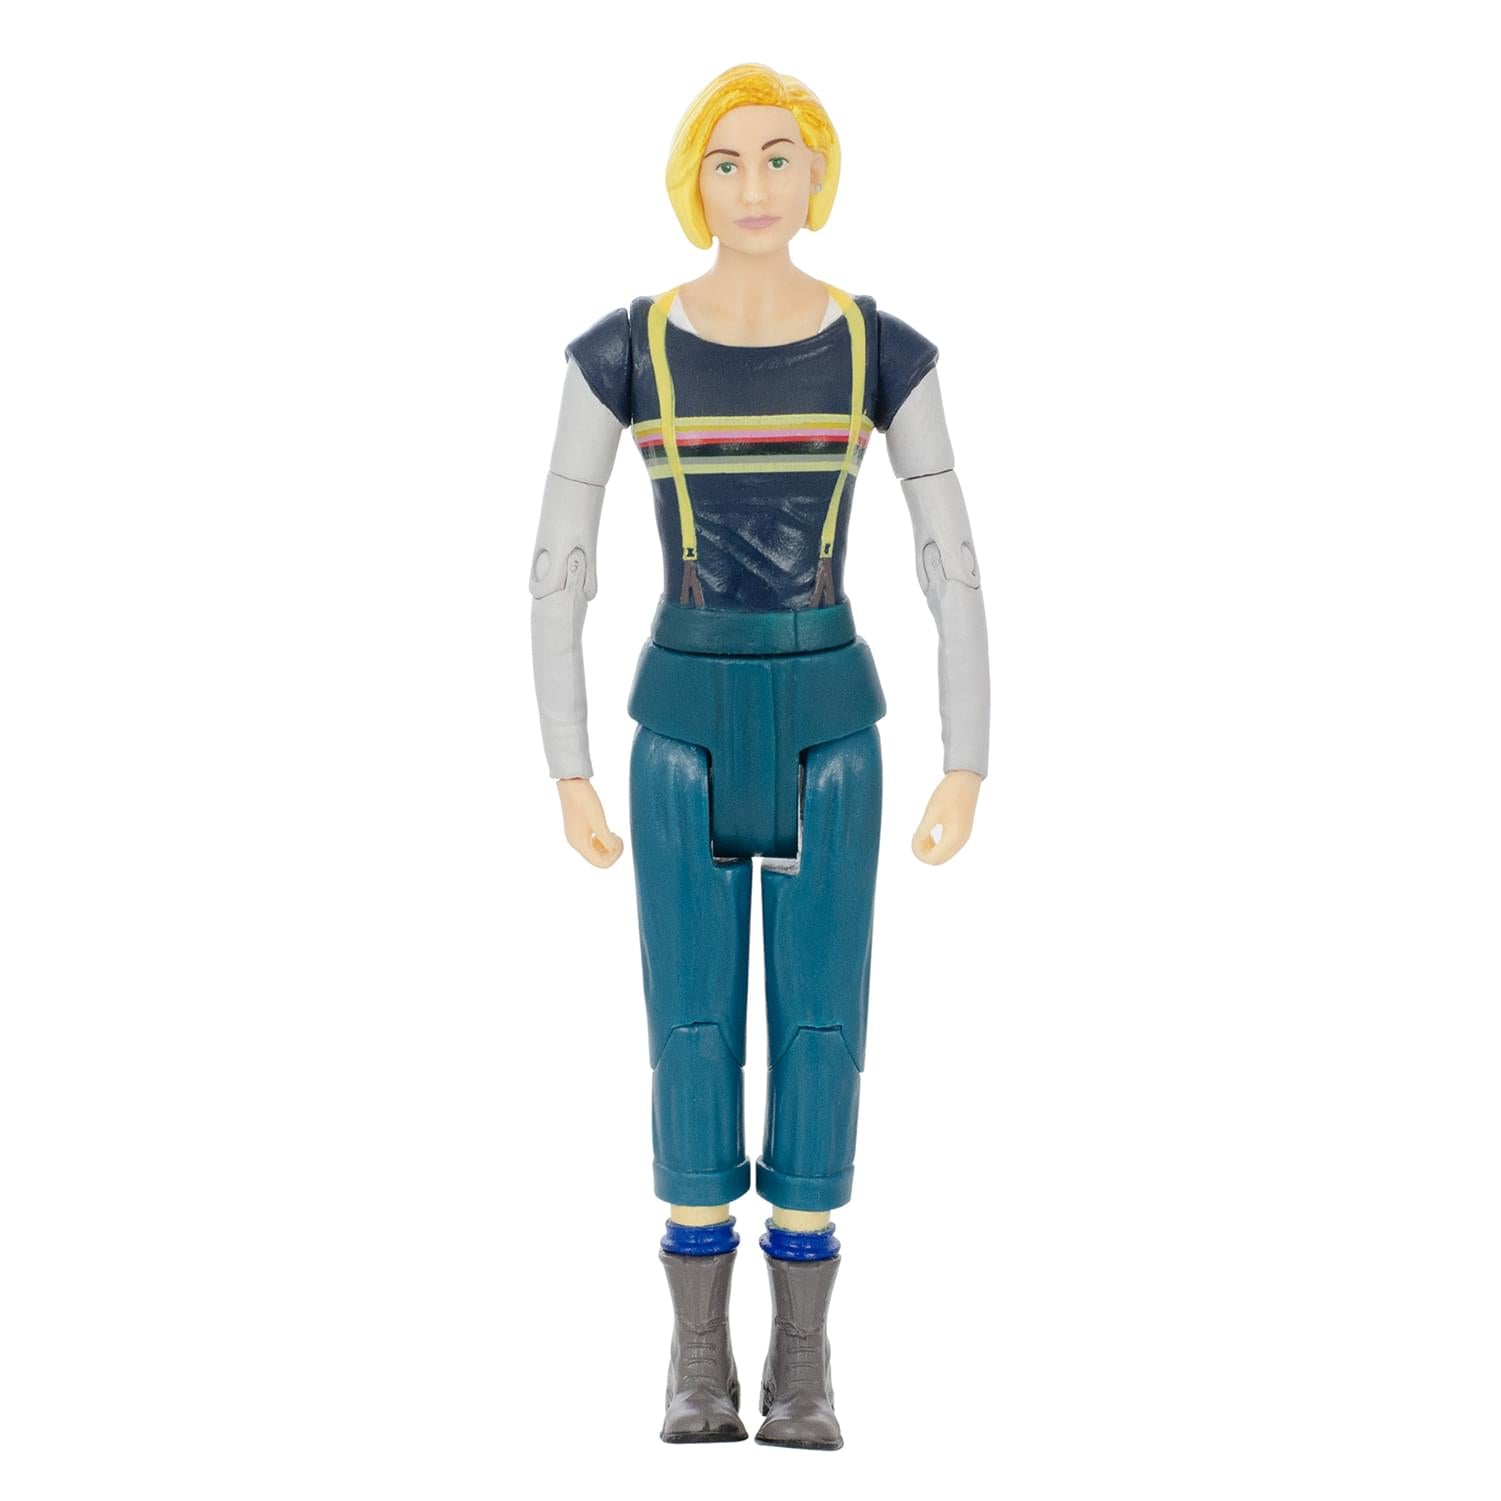 Doctor Who 13th Doctor 5.5 Inch Action Figure